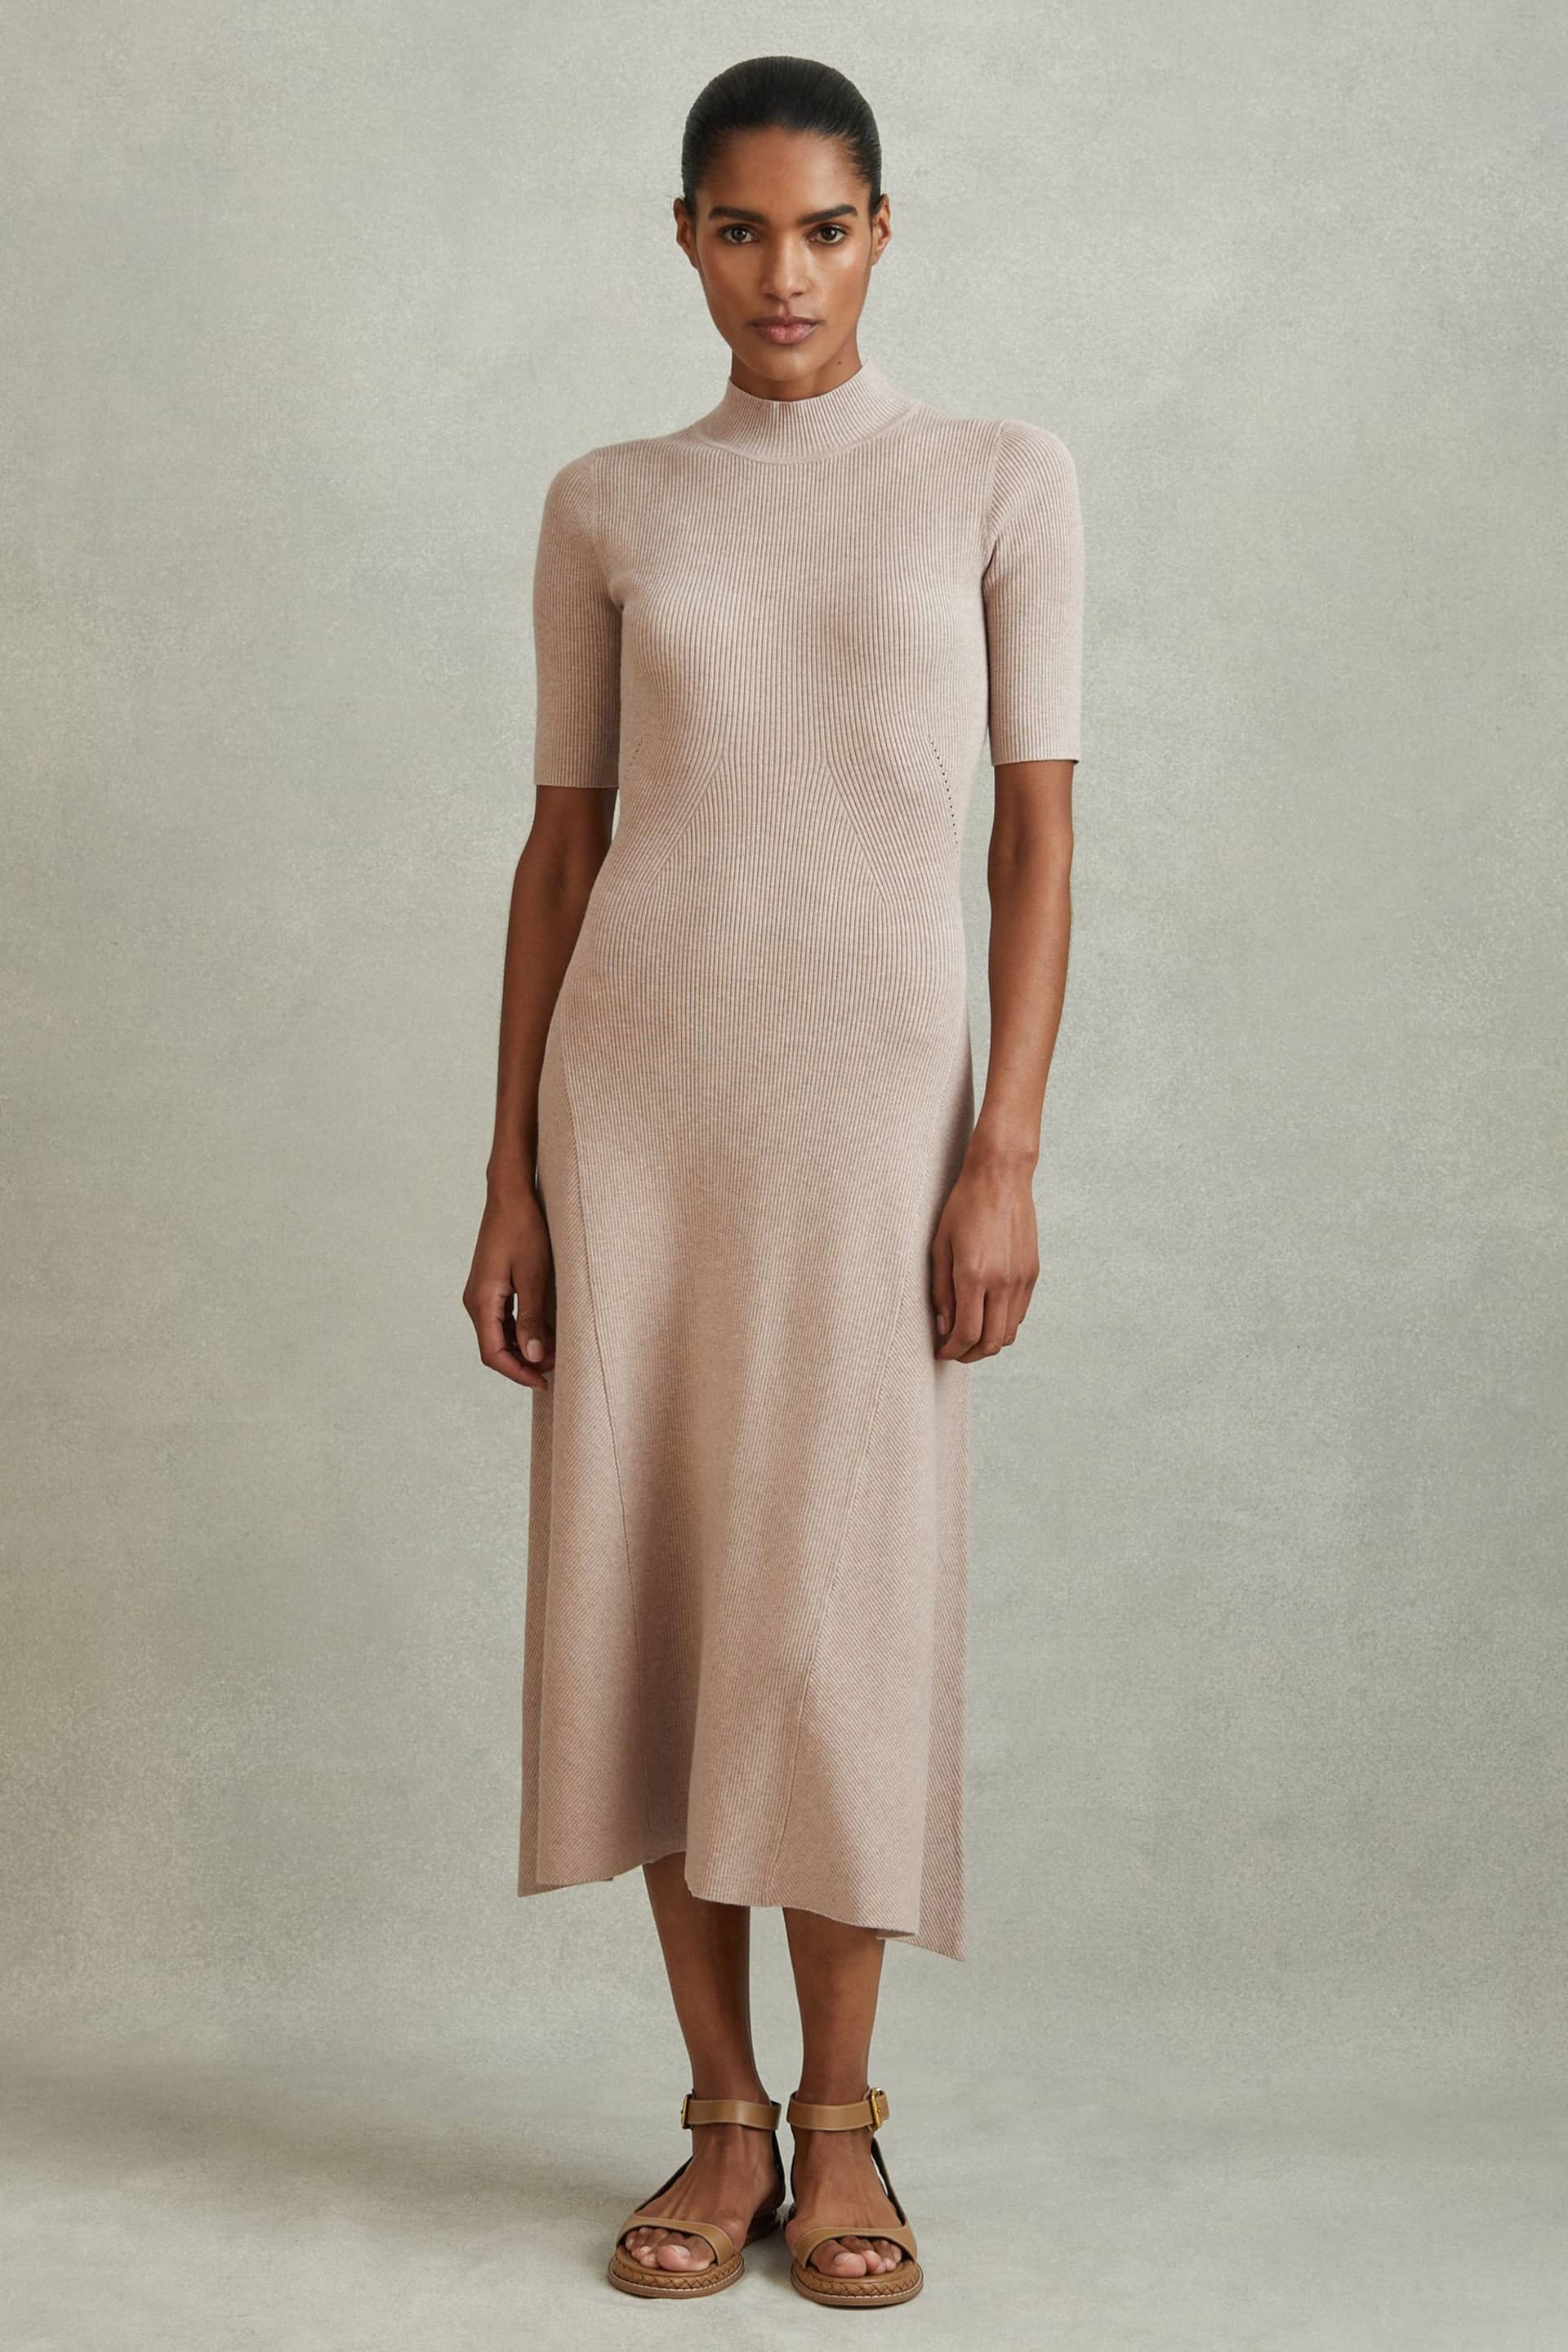 Reiss Neutral Caitlyn Ribbed Bodycon Midi Dress - Image 1 of 4